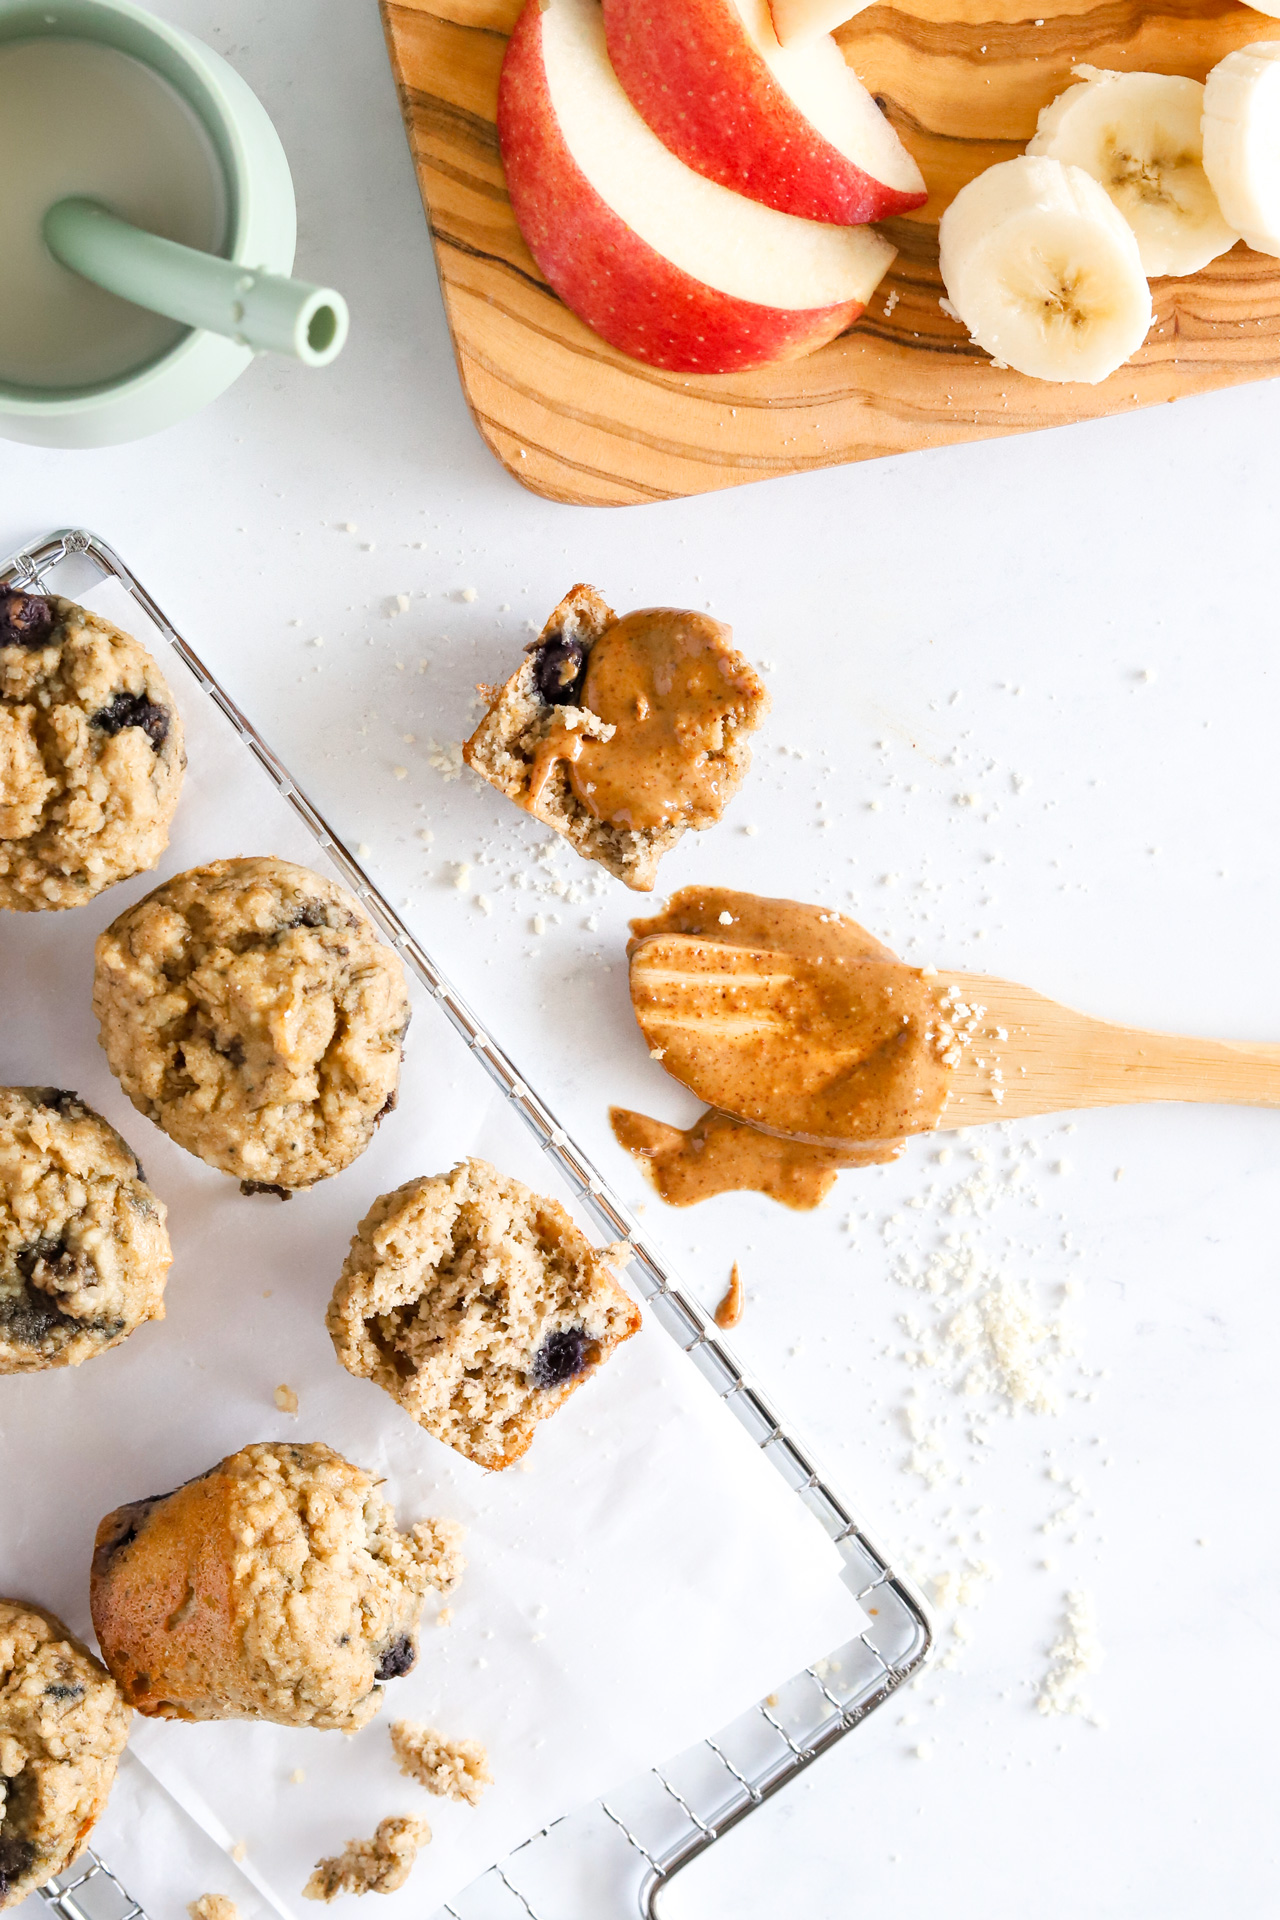 Healthy mini blueberry muffins with nut butter and apple slices